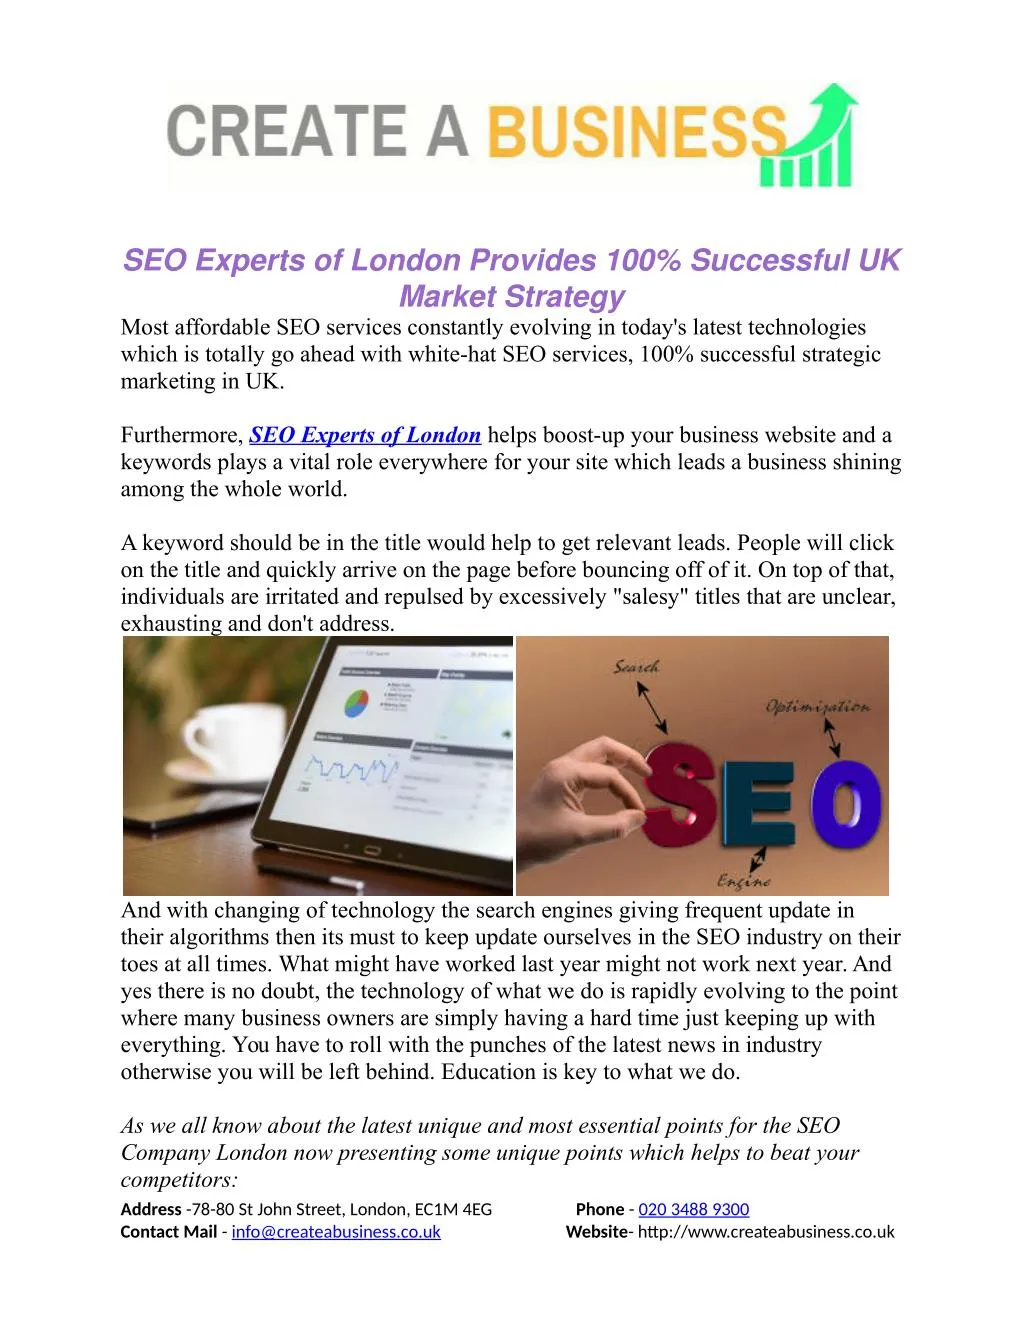 seo experts of london provides 100 successful